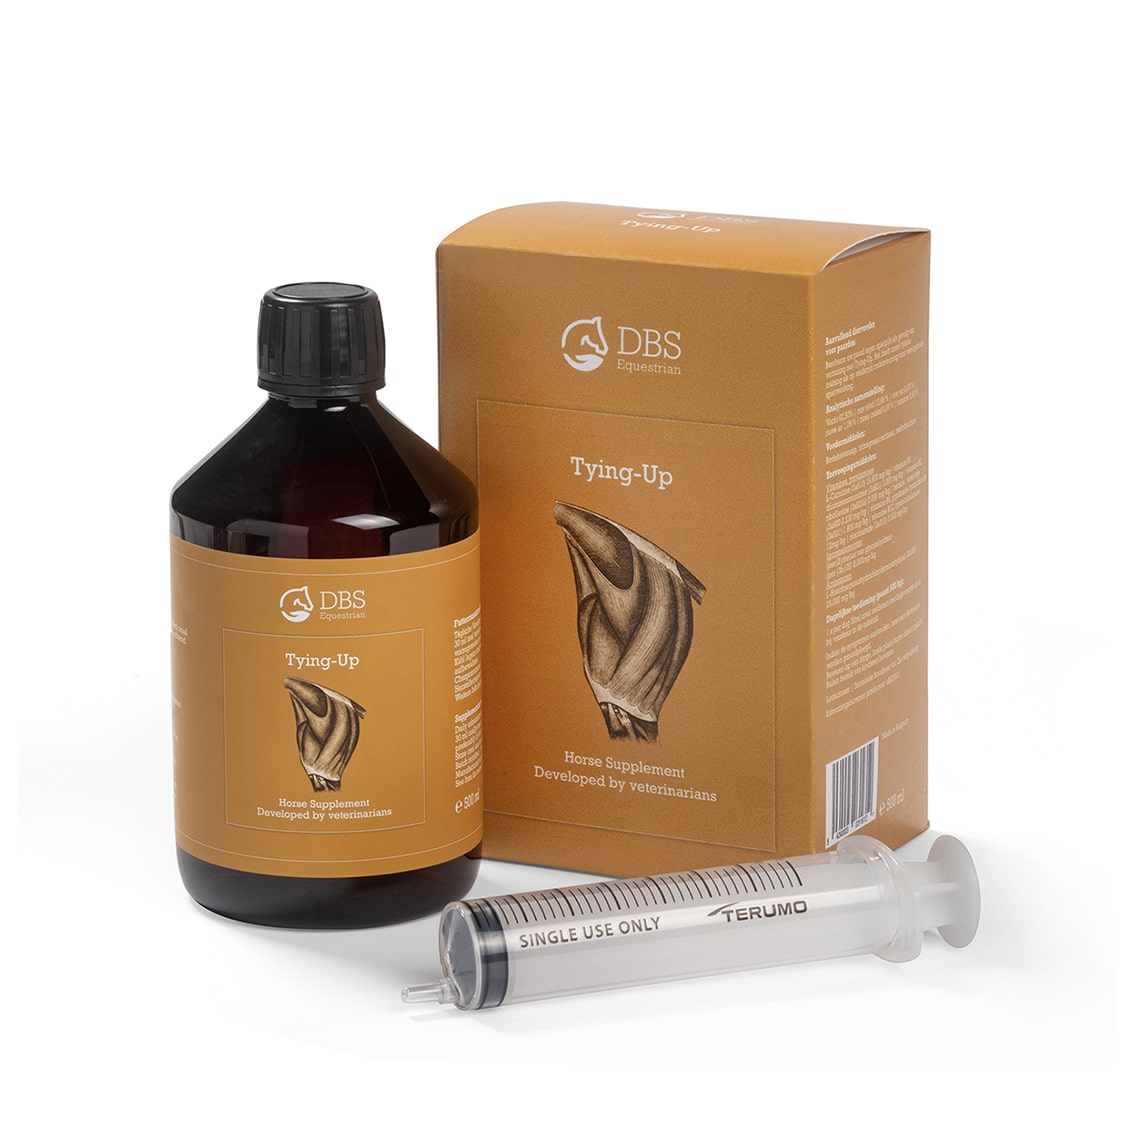 Picture of a horse supplement called Tying-Up. This product prevents muscle acidification in horses. This pictures shows the 500ml bottle and the box it's packed in plus an empty syringe.